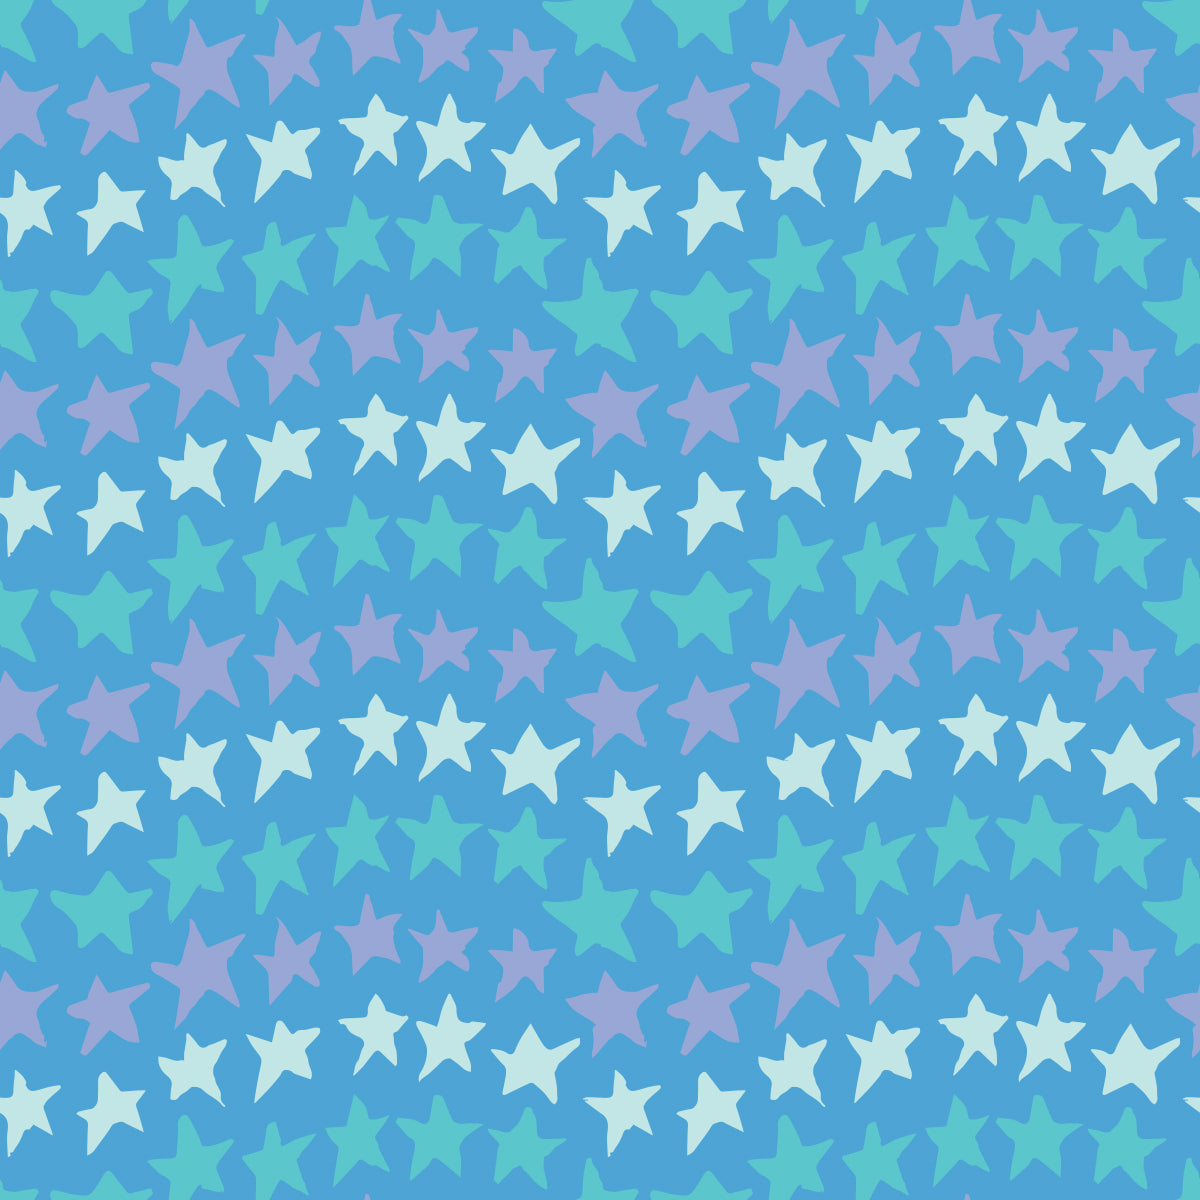 Rock on Stars Ocean features a repeating pattern in blue, green, and purple colors of undulating rows of stars. 